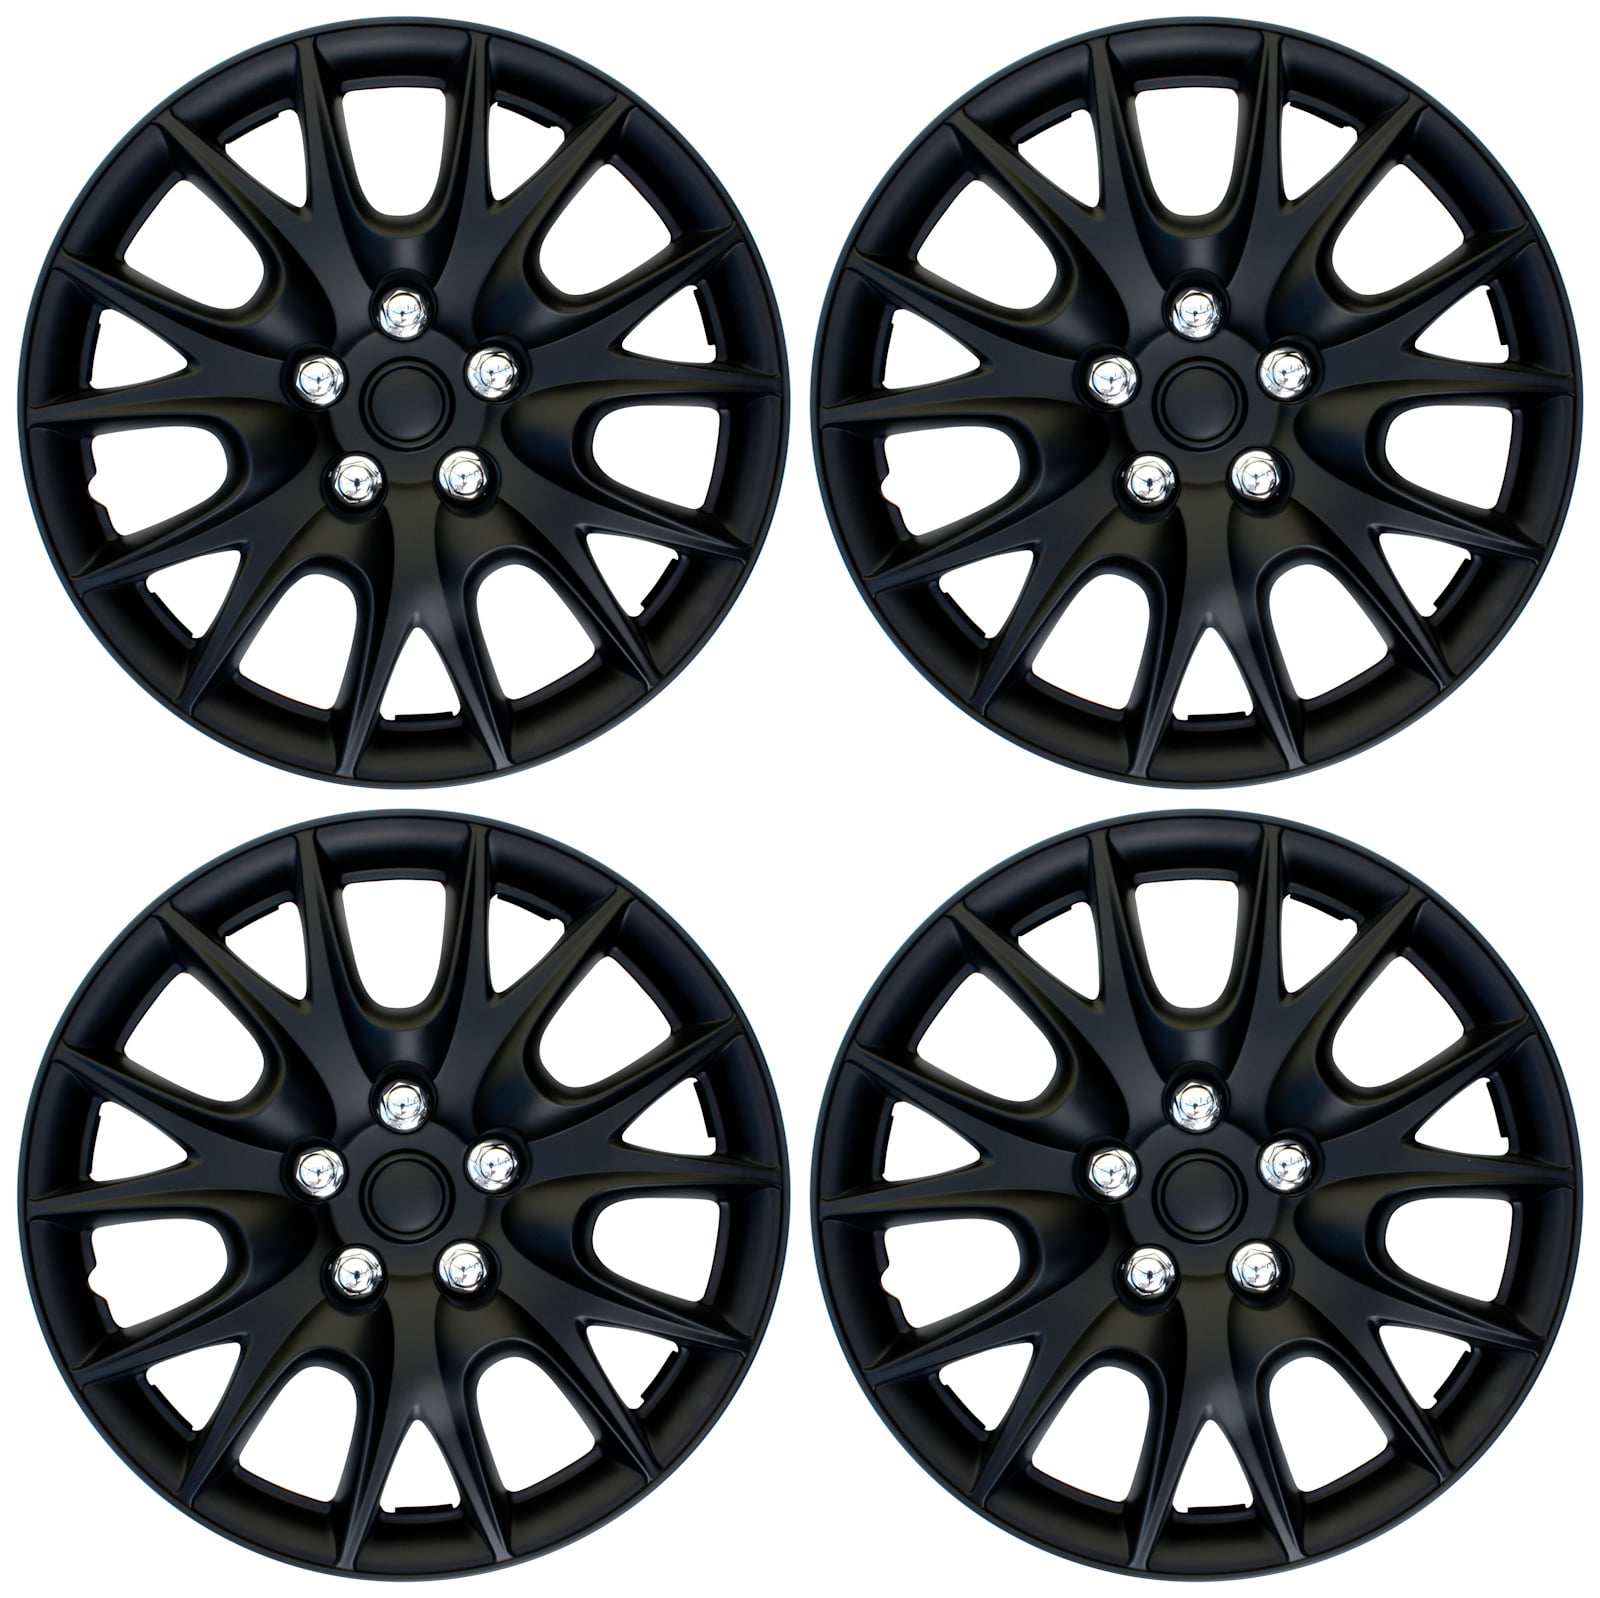 14'' Universal Fit ABS Plastic Wheel Trim Covers Stylish Hubcaps Set of 4 